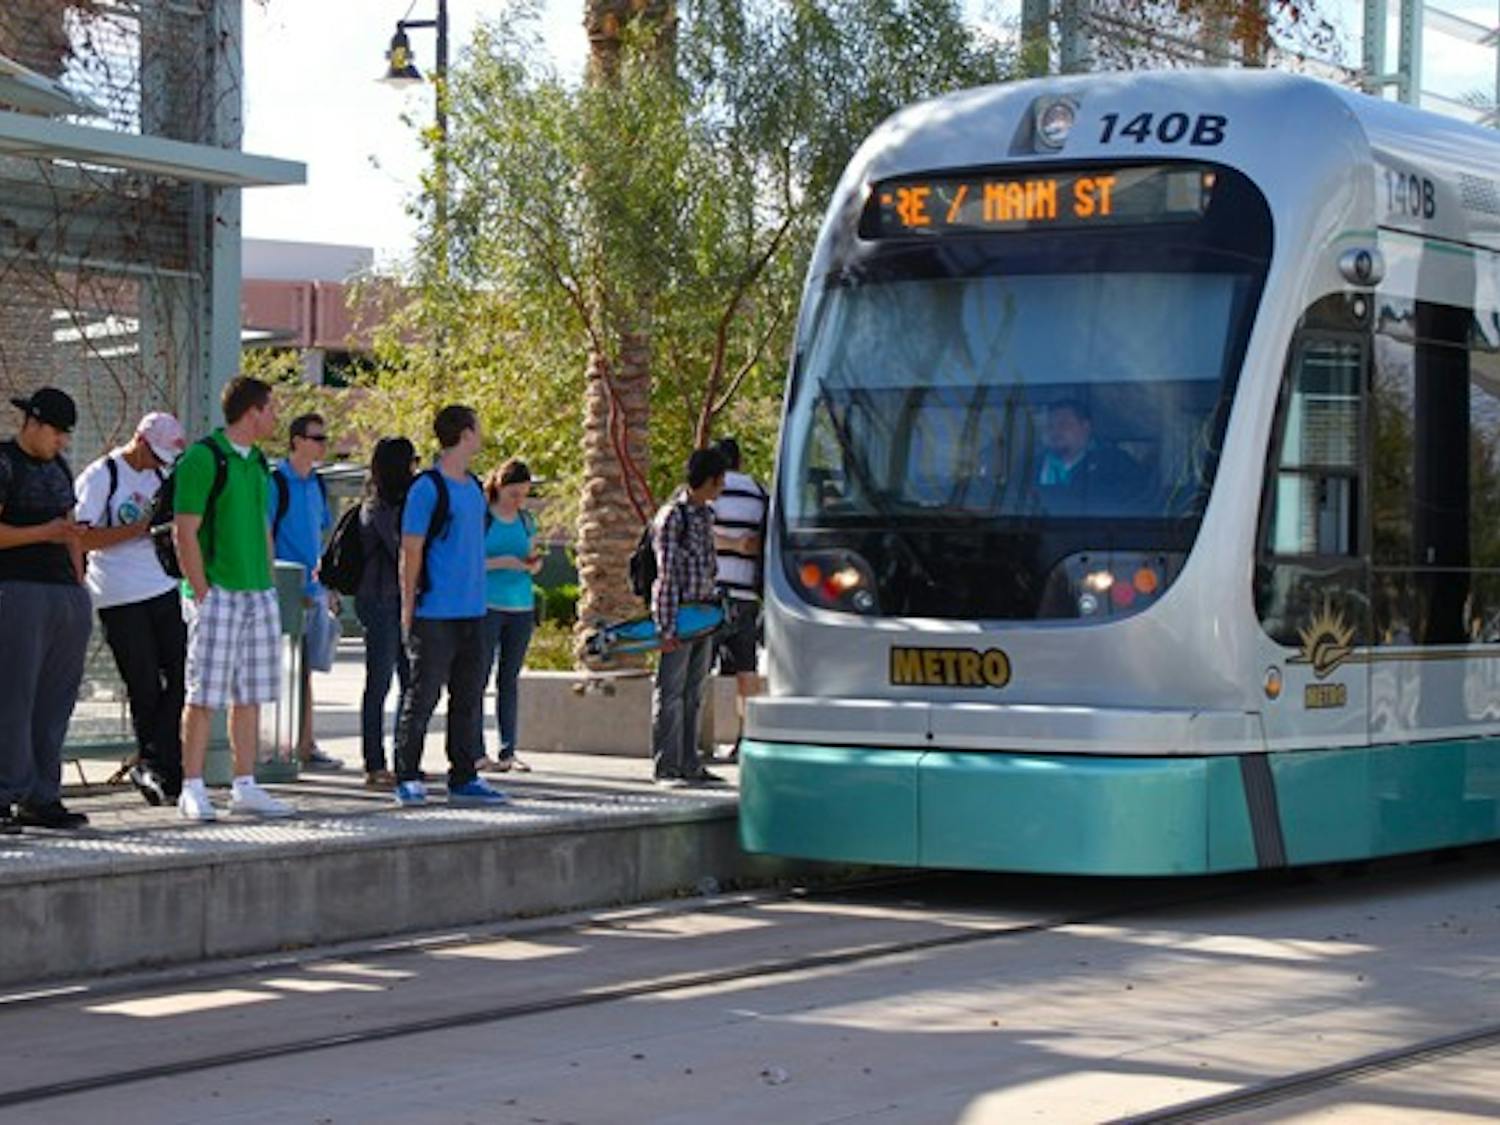 ALL ABOARD: Students prepare to board the light rail at the ASU Tempe Campus stop at Rural Road and University Drive. (Photo by Rosie Gochnour)